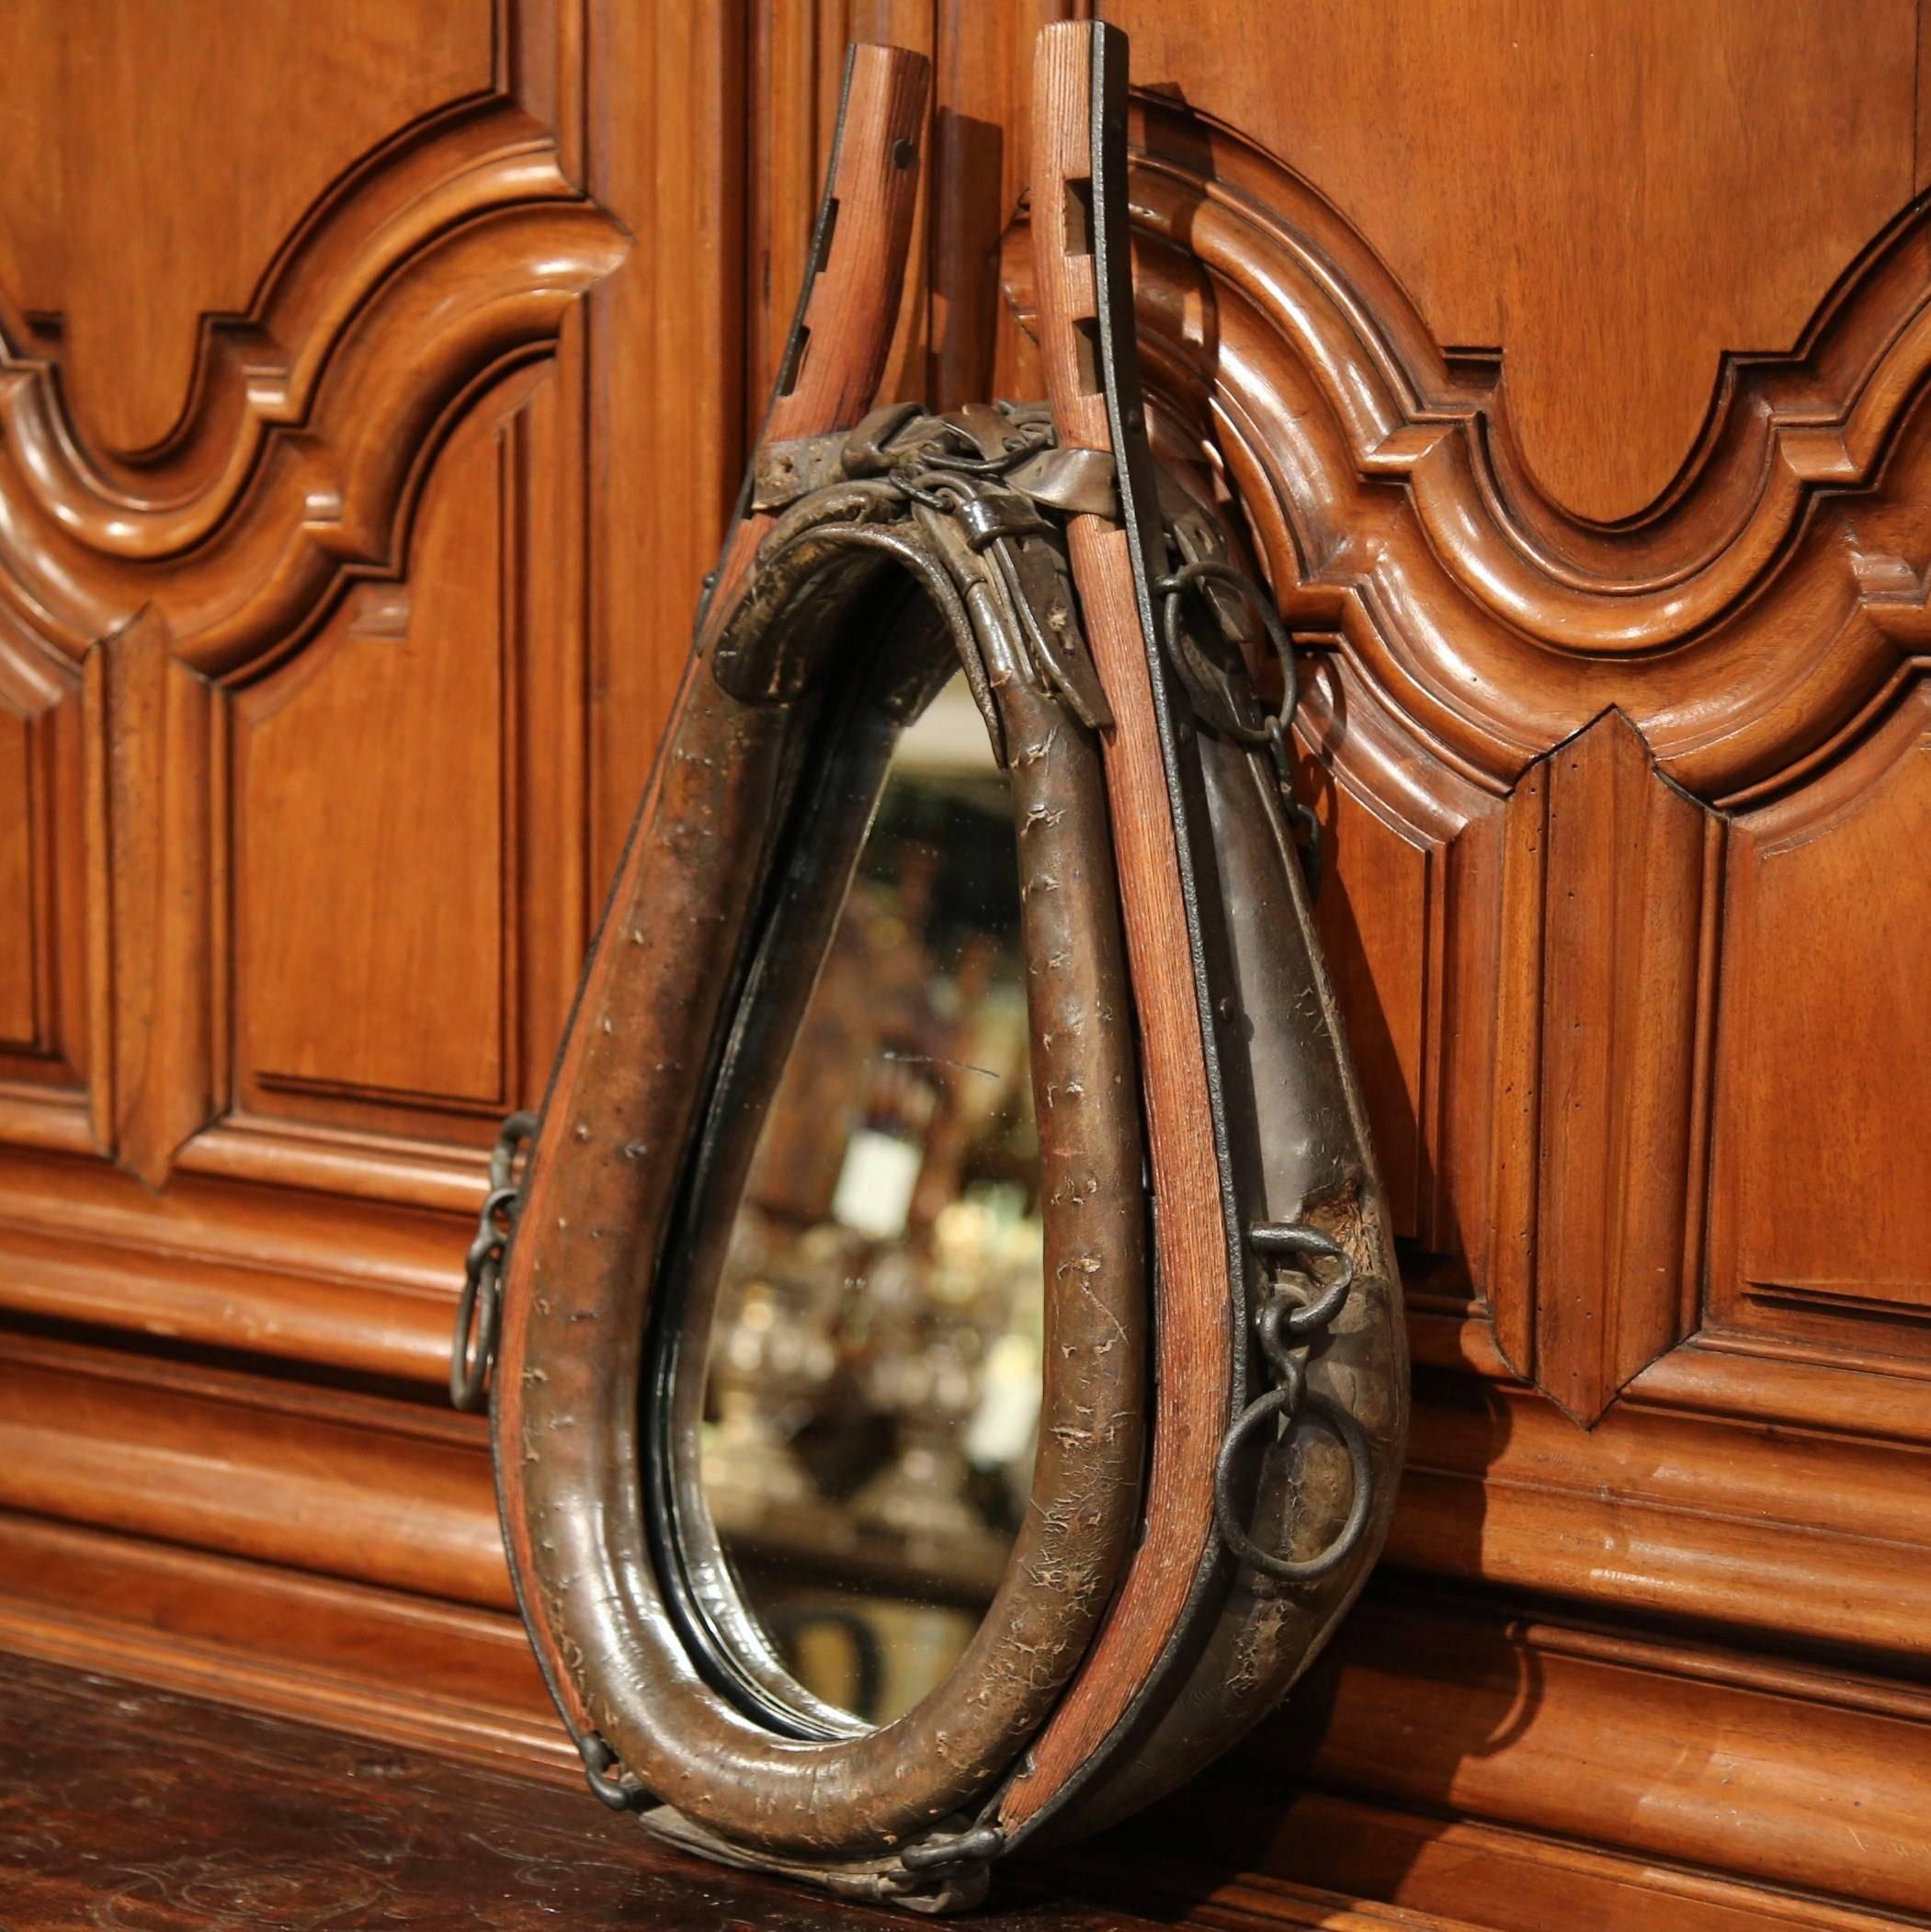 The wall hanging mirror is a unique find for the rustic home. The mirror is framed by a fine, antique horse collar from France, circa 1880. The collar is carved in wood and covered with leather and original hooks. This collar has been transformed